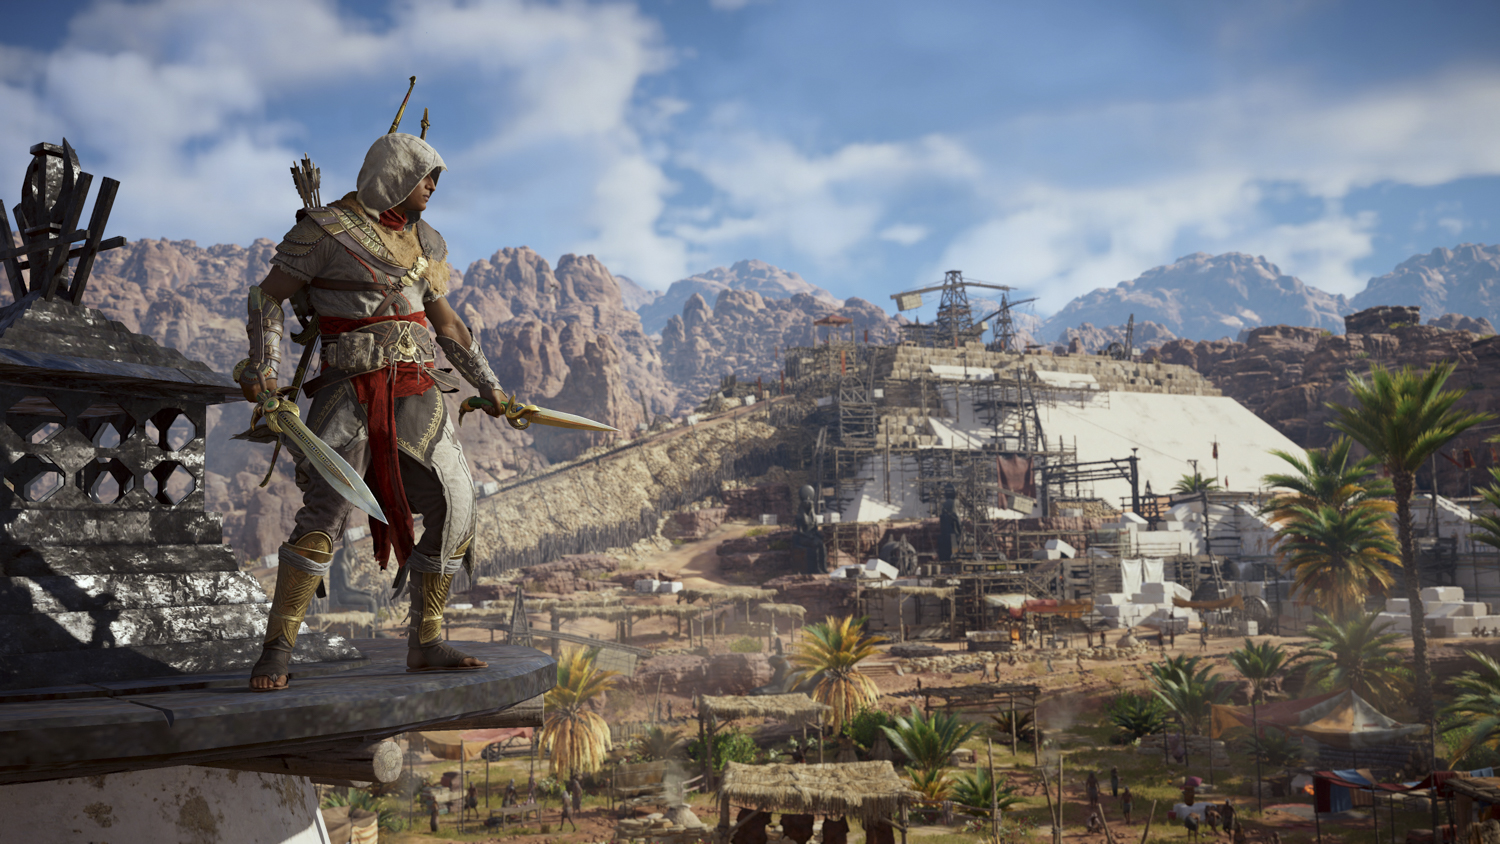 Question the Creed with the latest Assassin's Creed digital